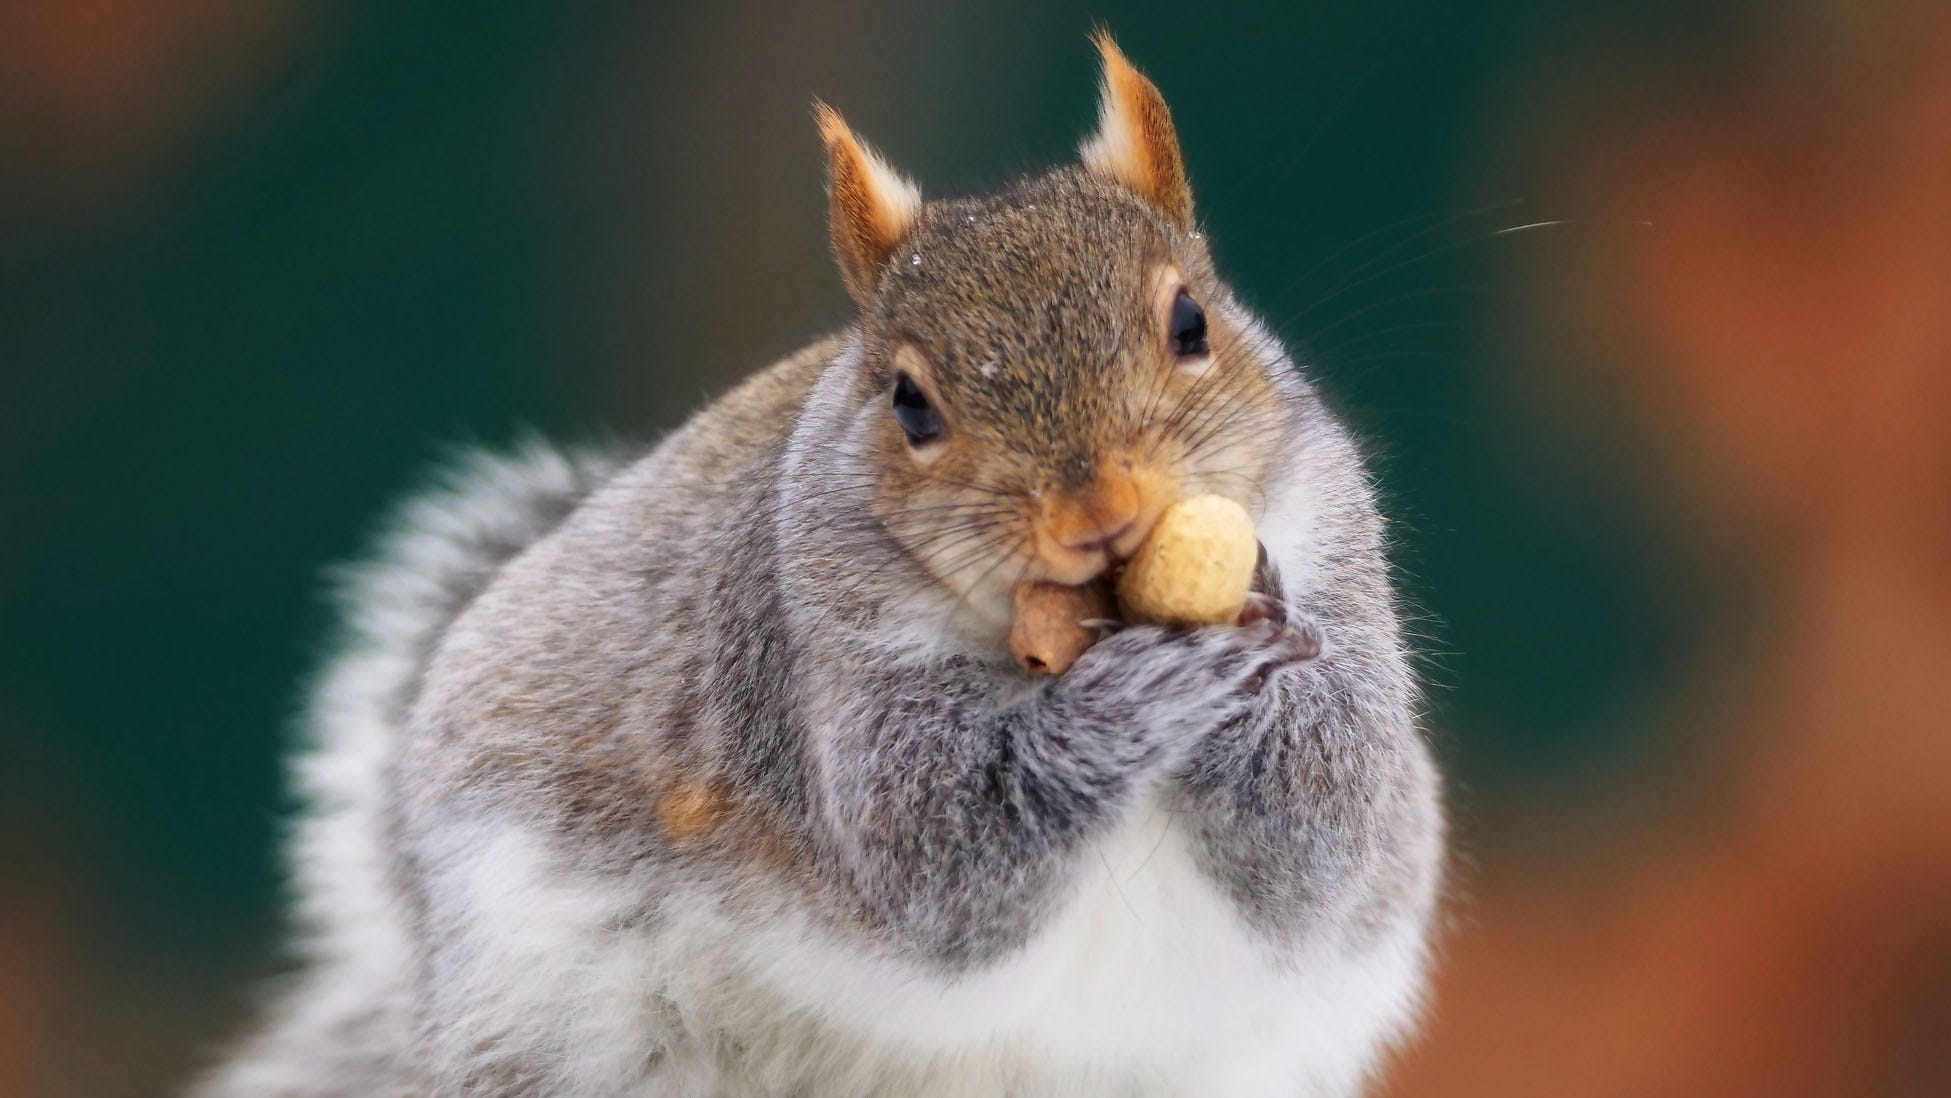 FOX NEWS: Fat squirrel spotted eating McDonald's cheeseburger outside Florida location